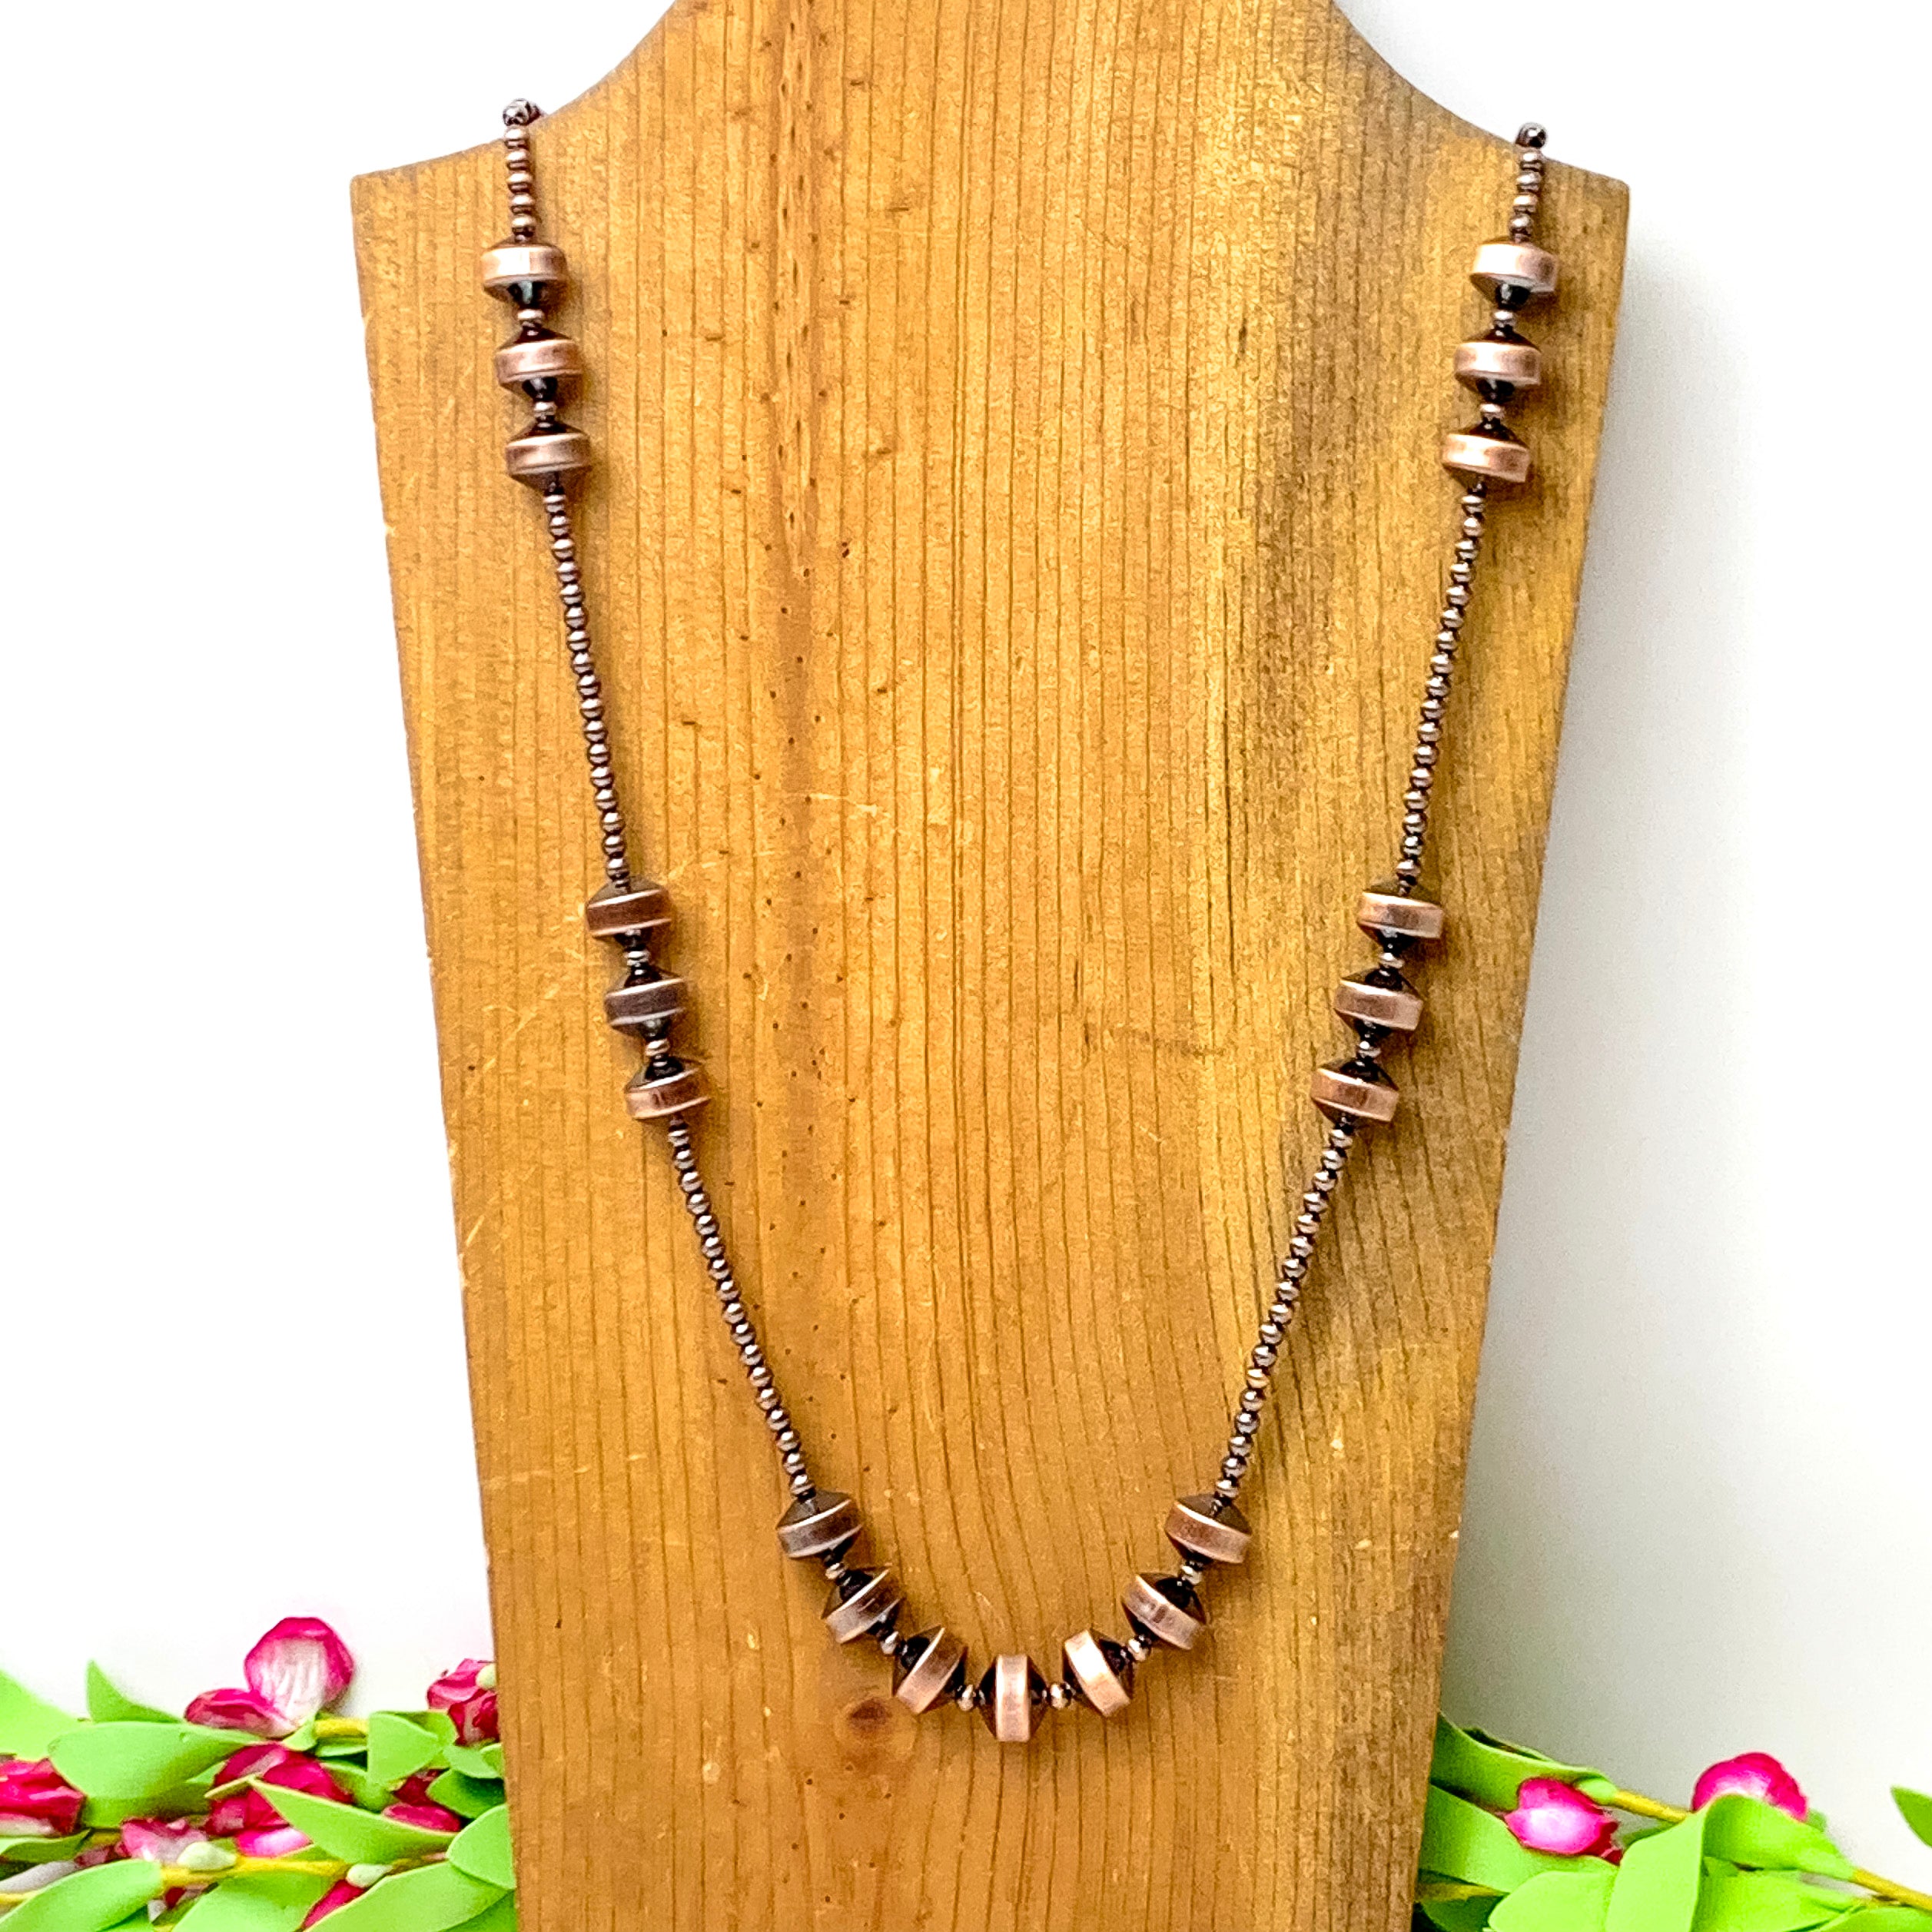 Faux Navajo Pearl and Rondelle Necklace in Copper Tone - Giddy Up Glamour Boutique